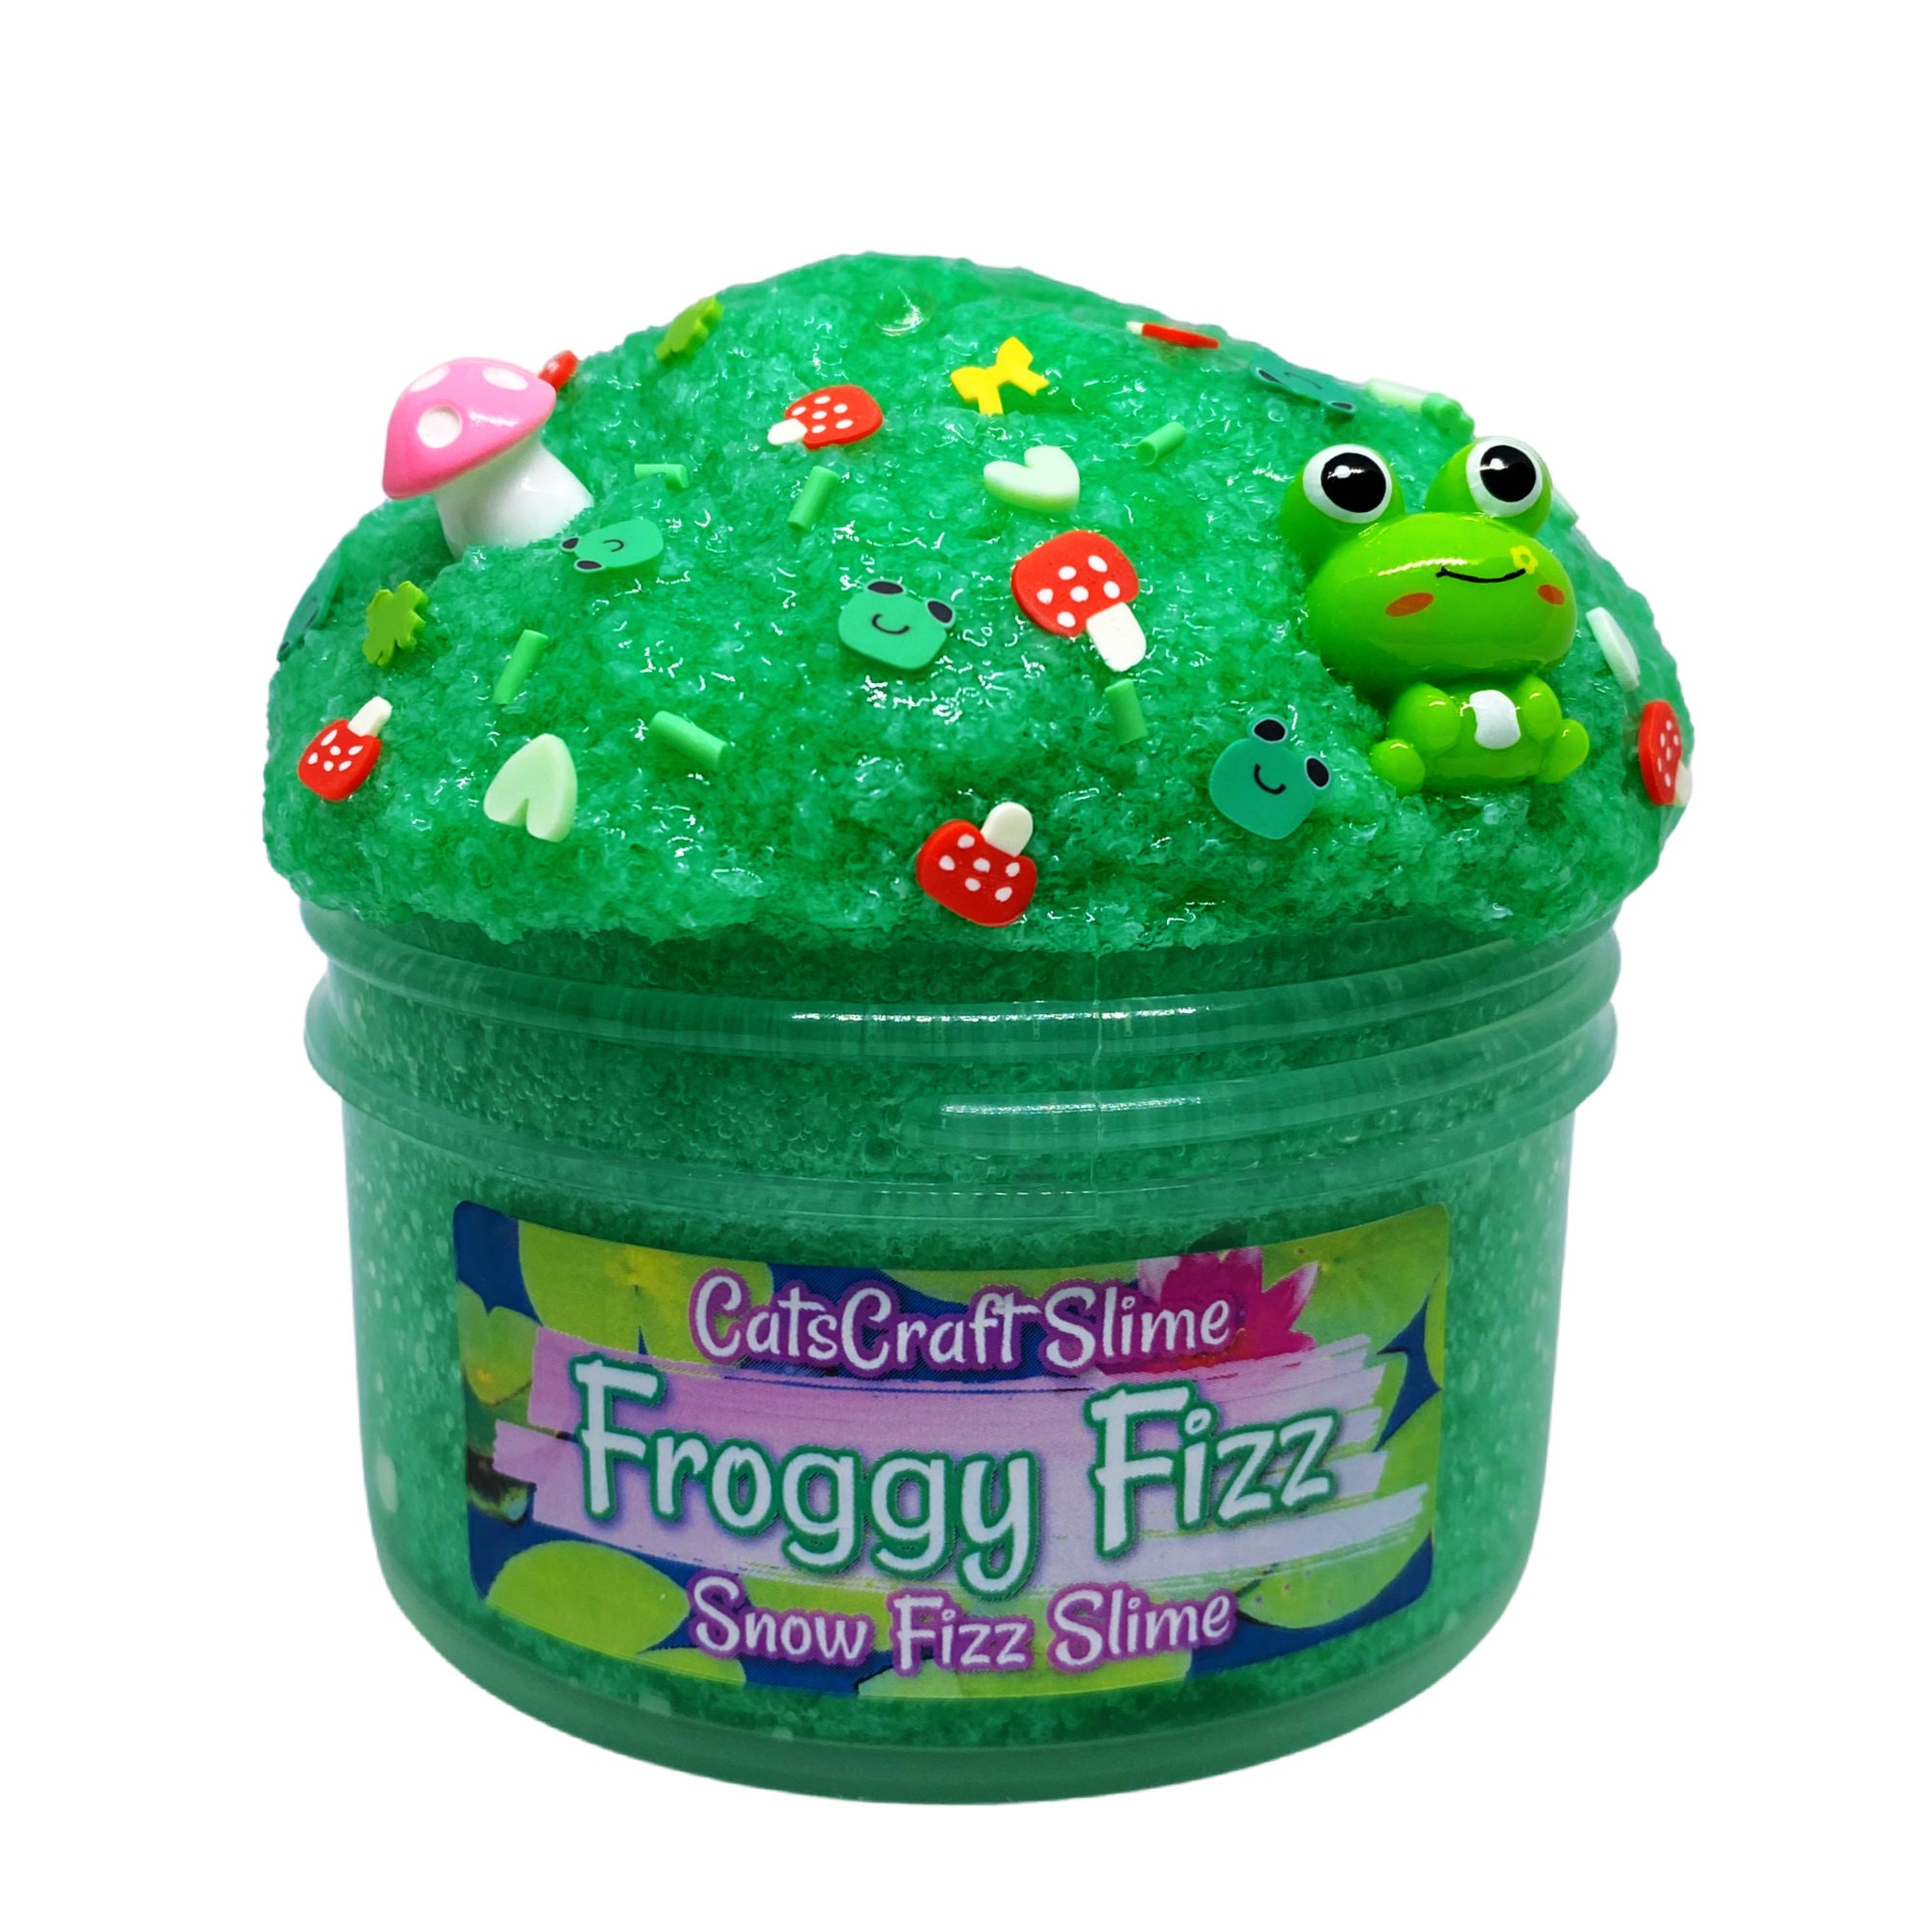 Snow Fizz froggy Fizz Scented Crunchy Slime ASMR With Frog